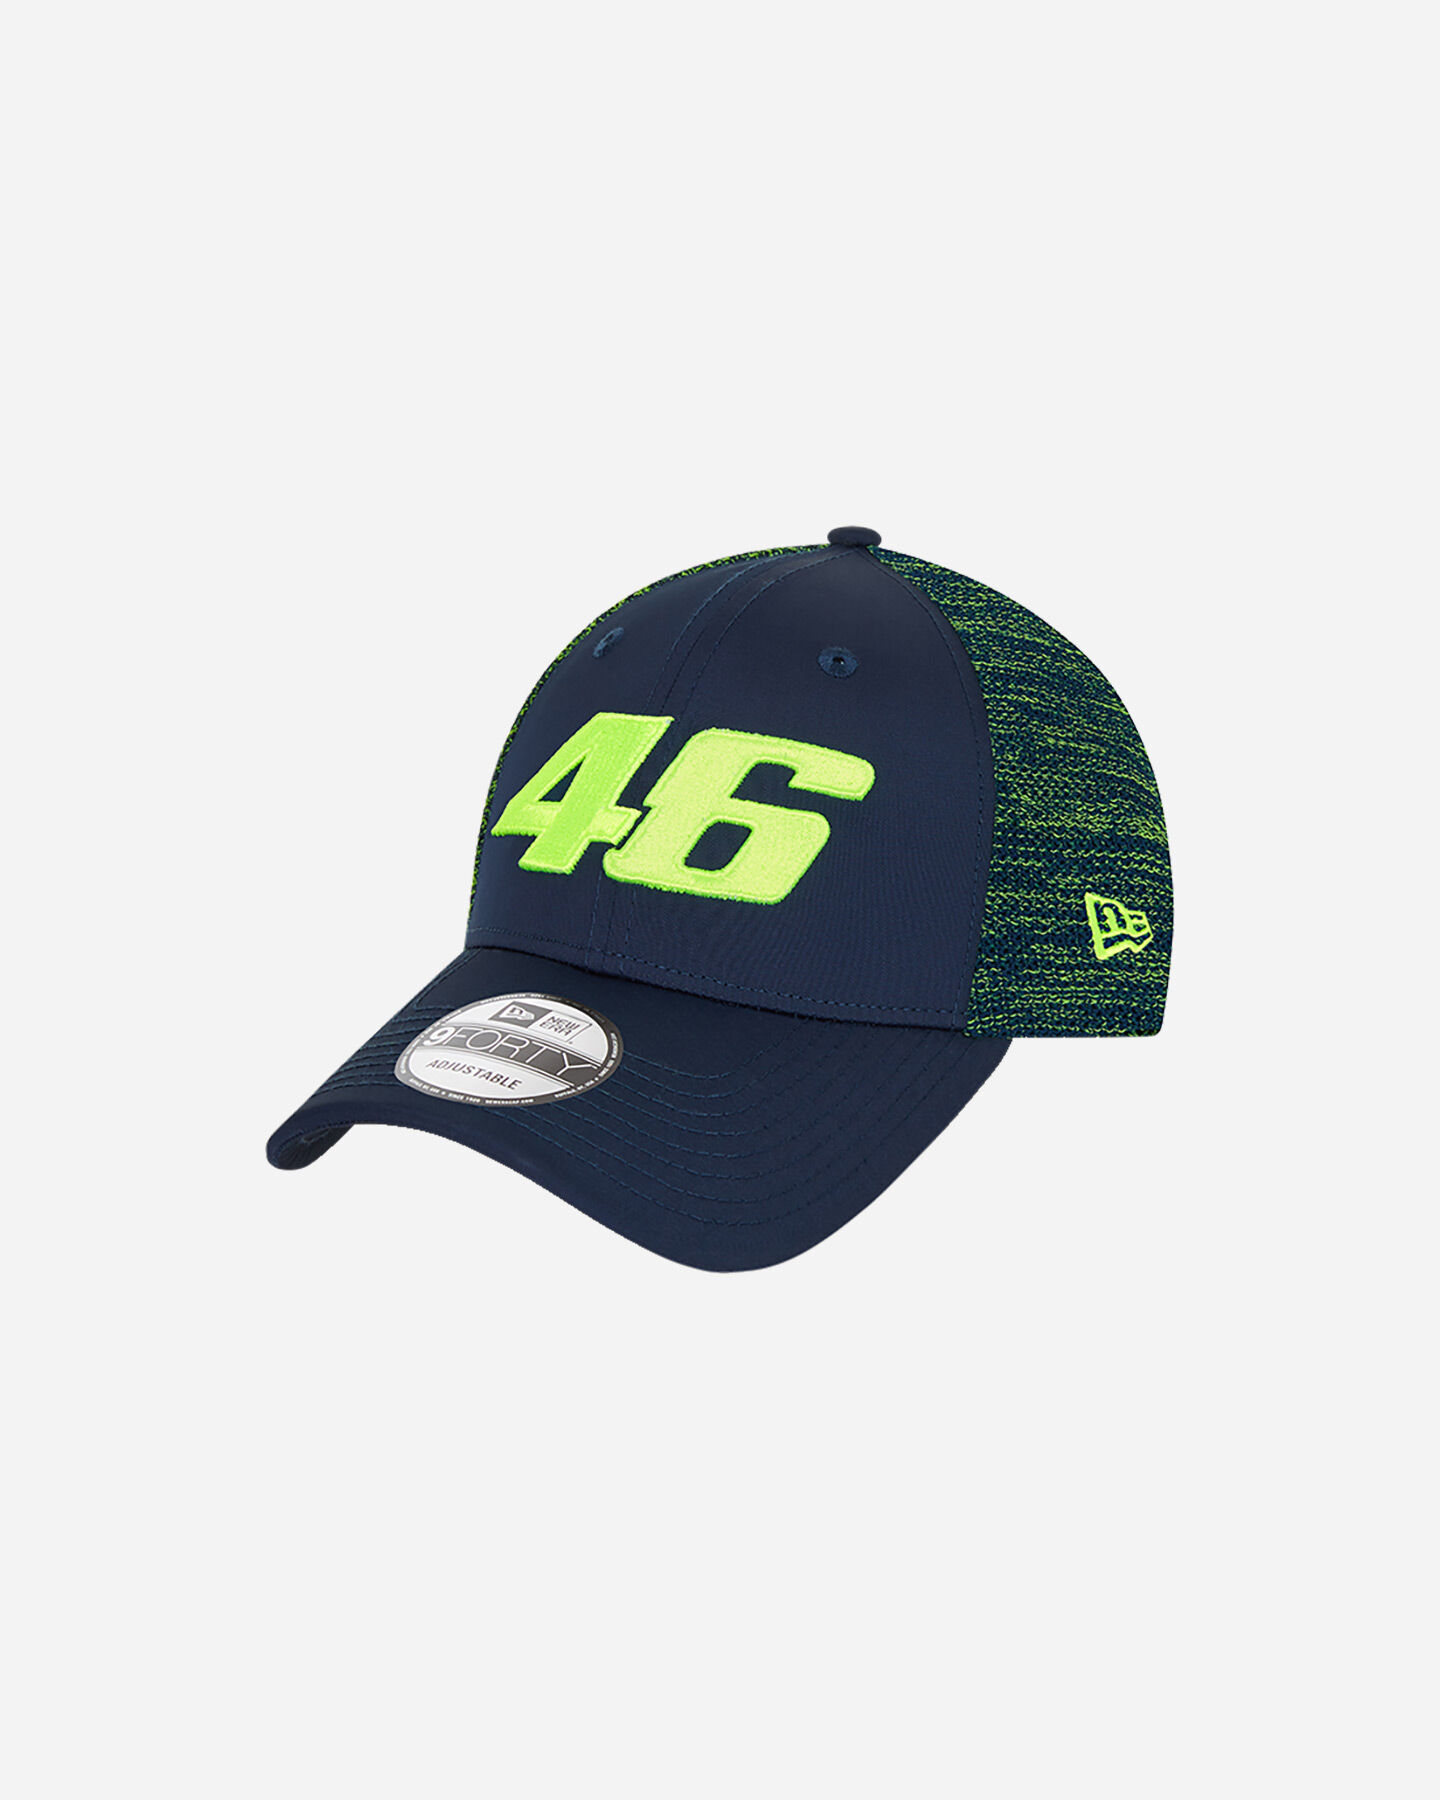  Cappellino NEW ERA 9FORTY RACING VR46  S5340806|401|OSFM scatto 0